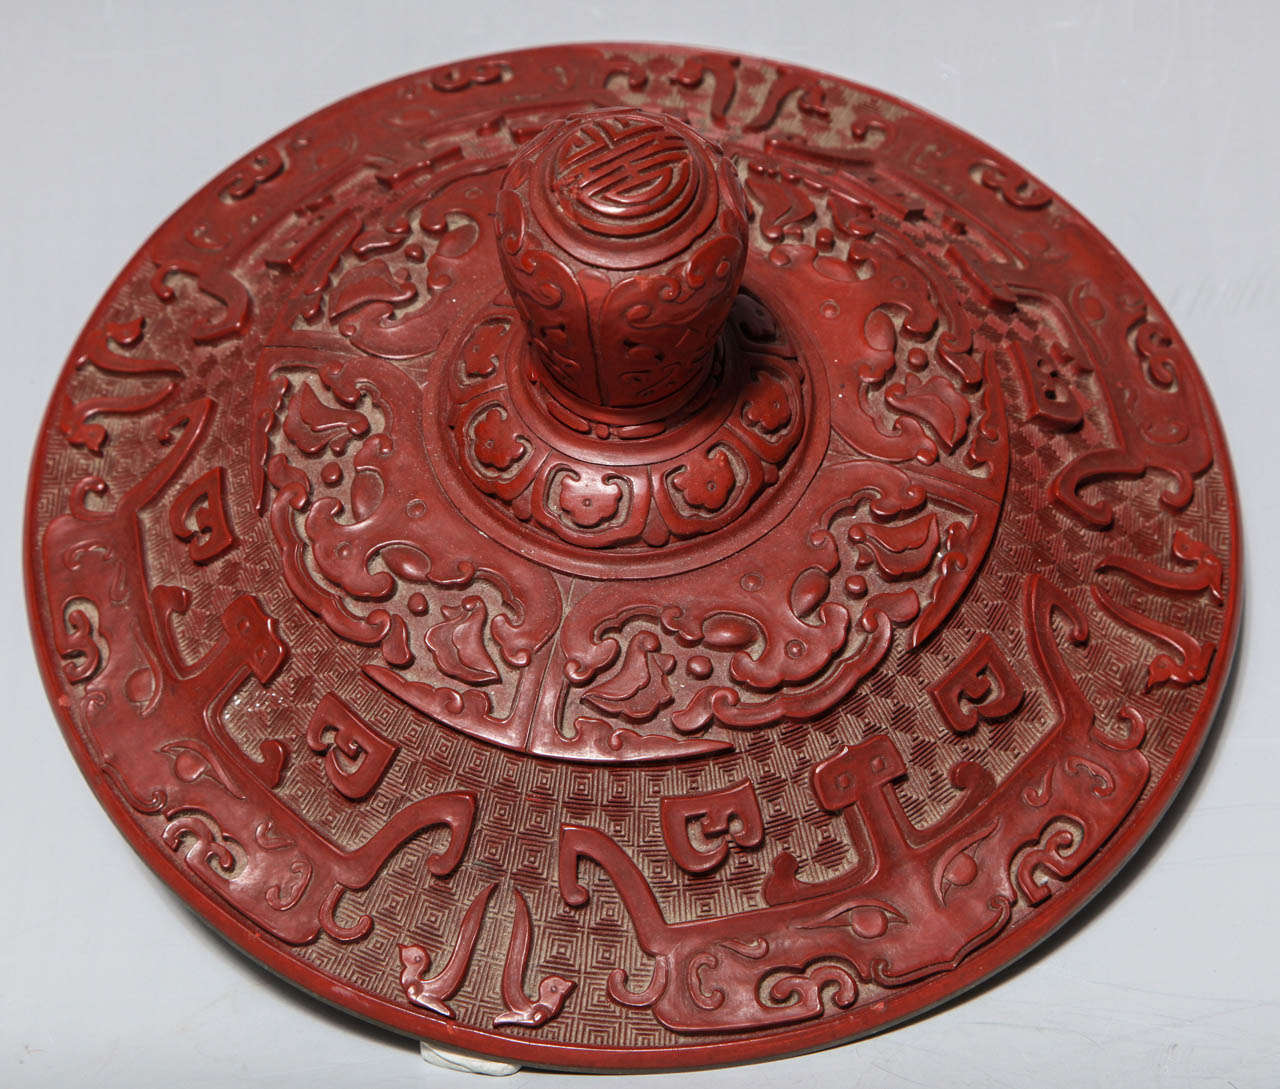 Wood A Monumental Chinese Cinnabar Red Lacquer Incense Burner of Archaic Form and Decoration